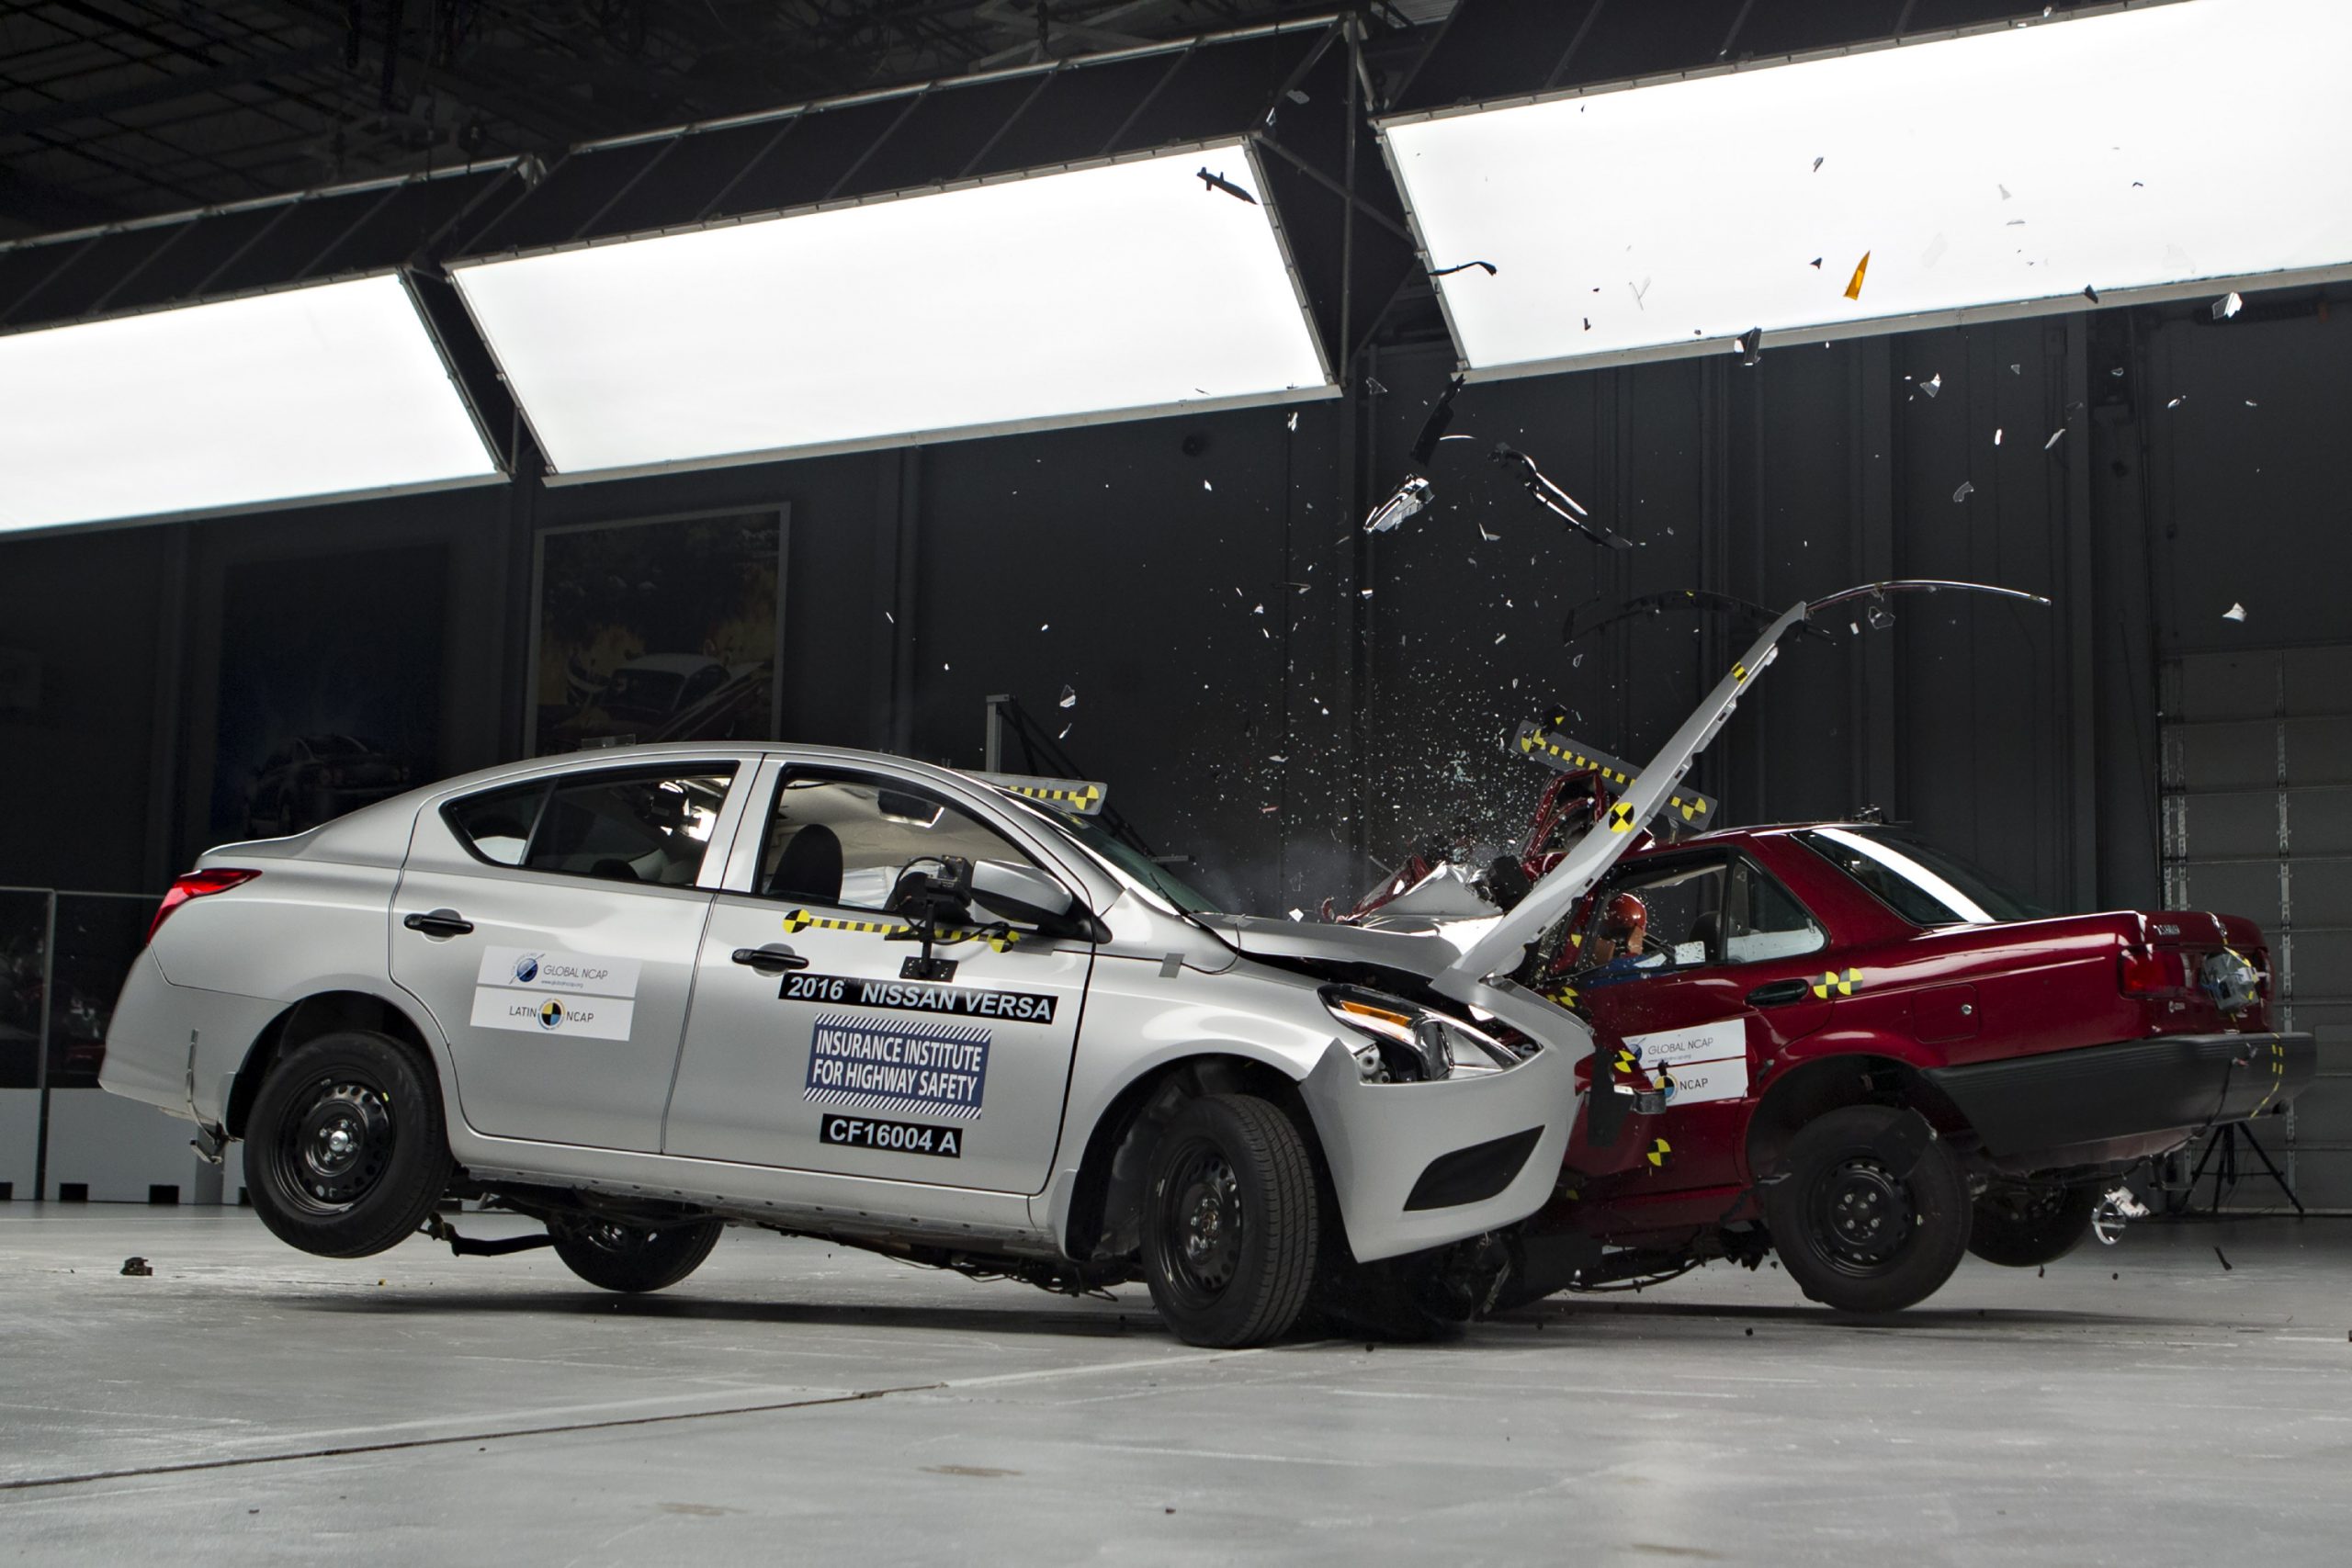 A silver Nissan Versa and a red car colliding during an IIHS crash test